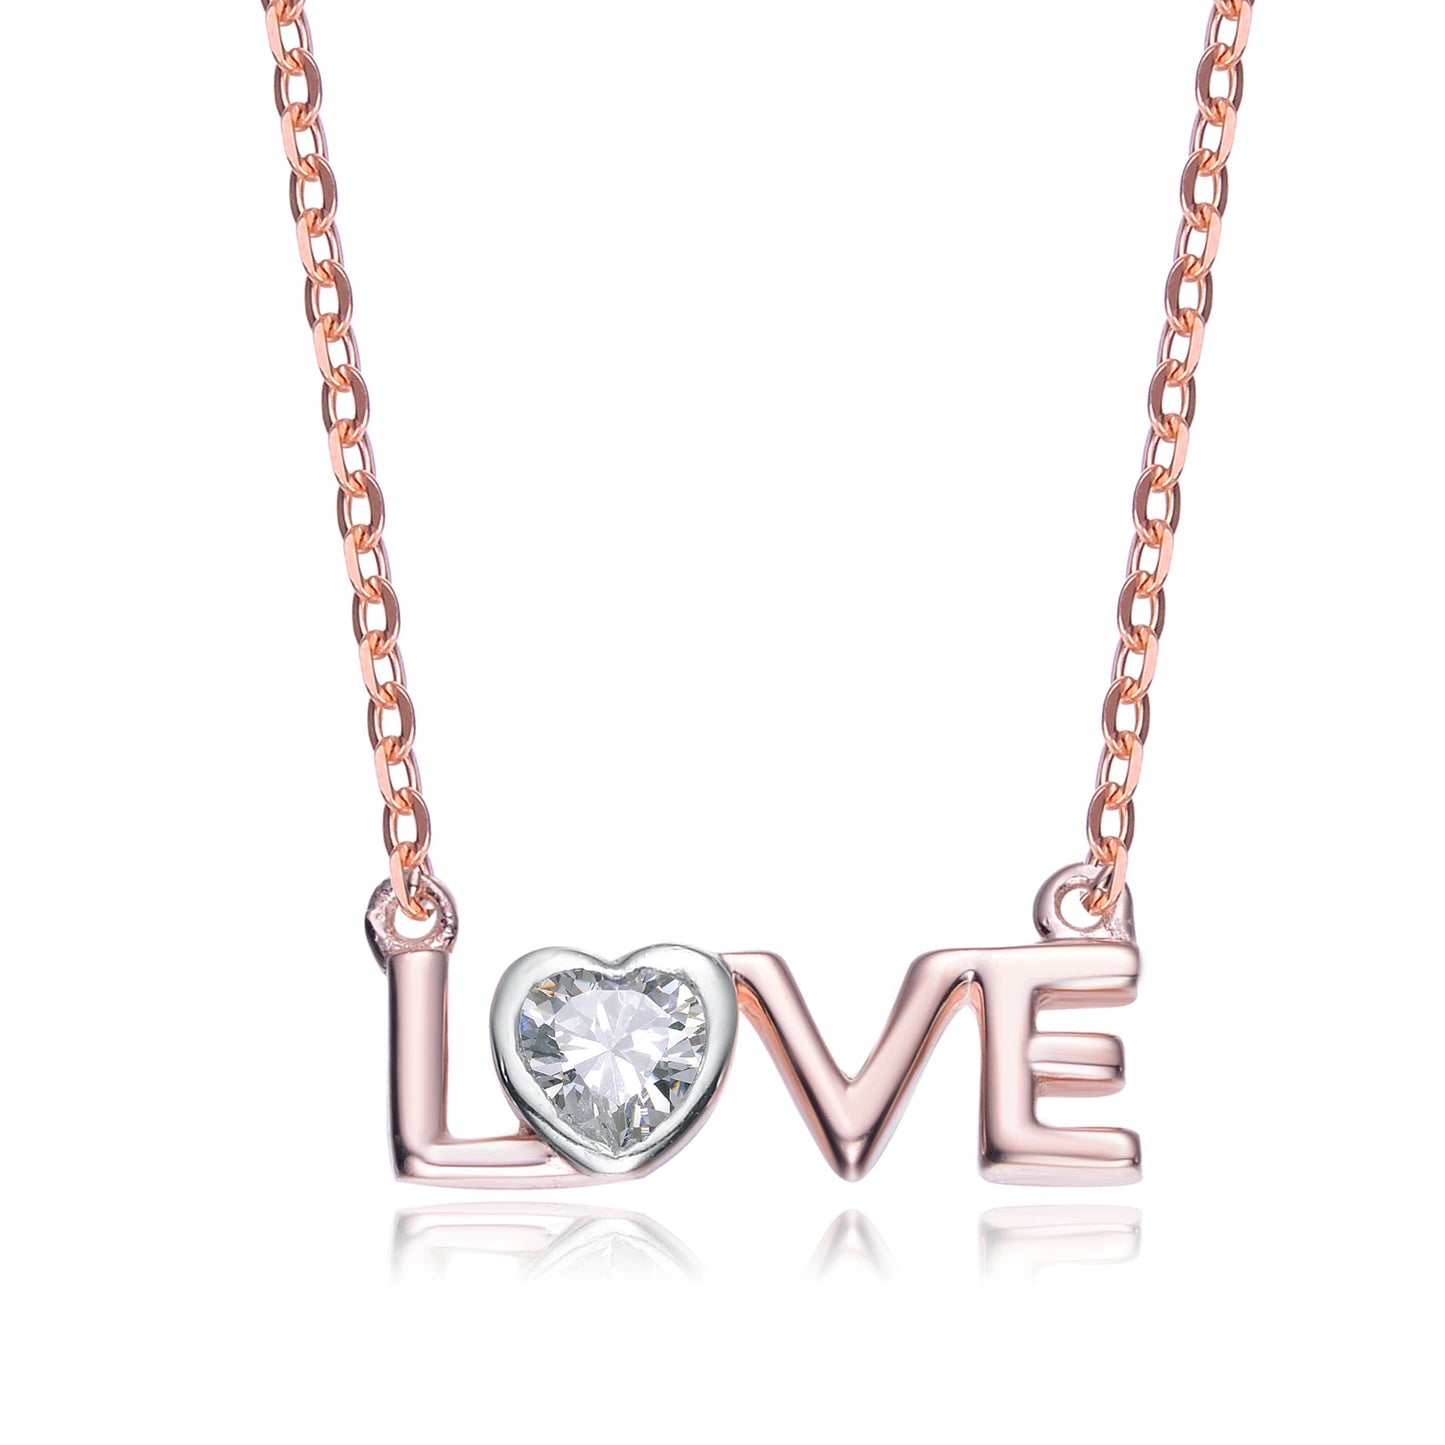 Genevive - Sterling Silver White Cubic Zirconia 'LOVE' Necklace: Gold